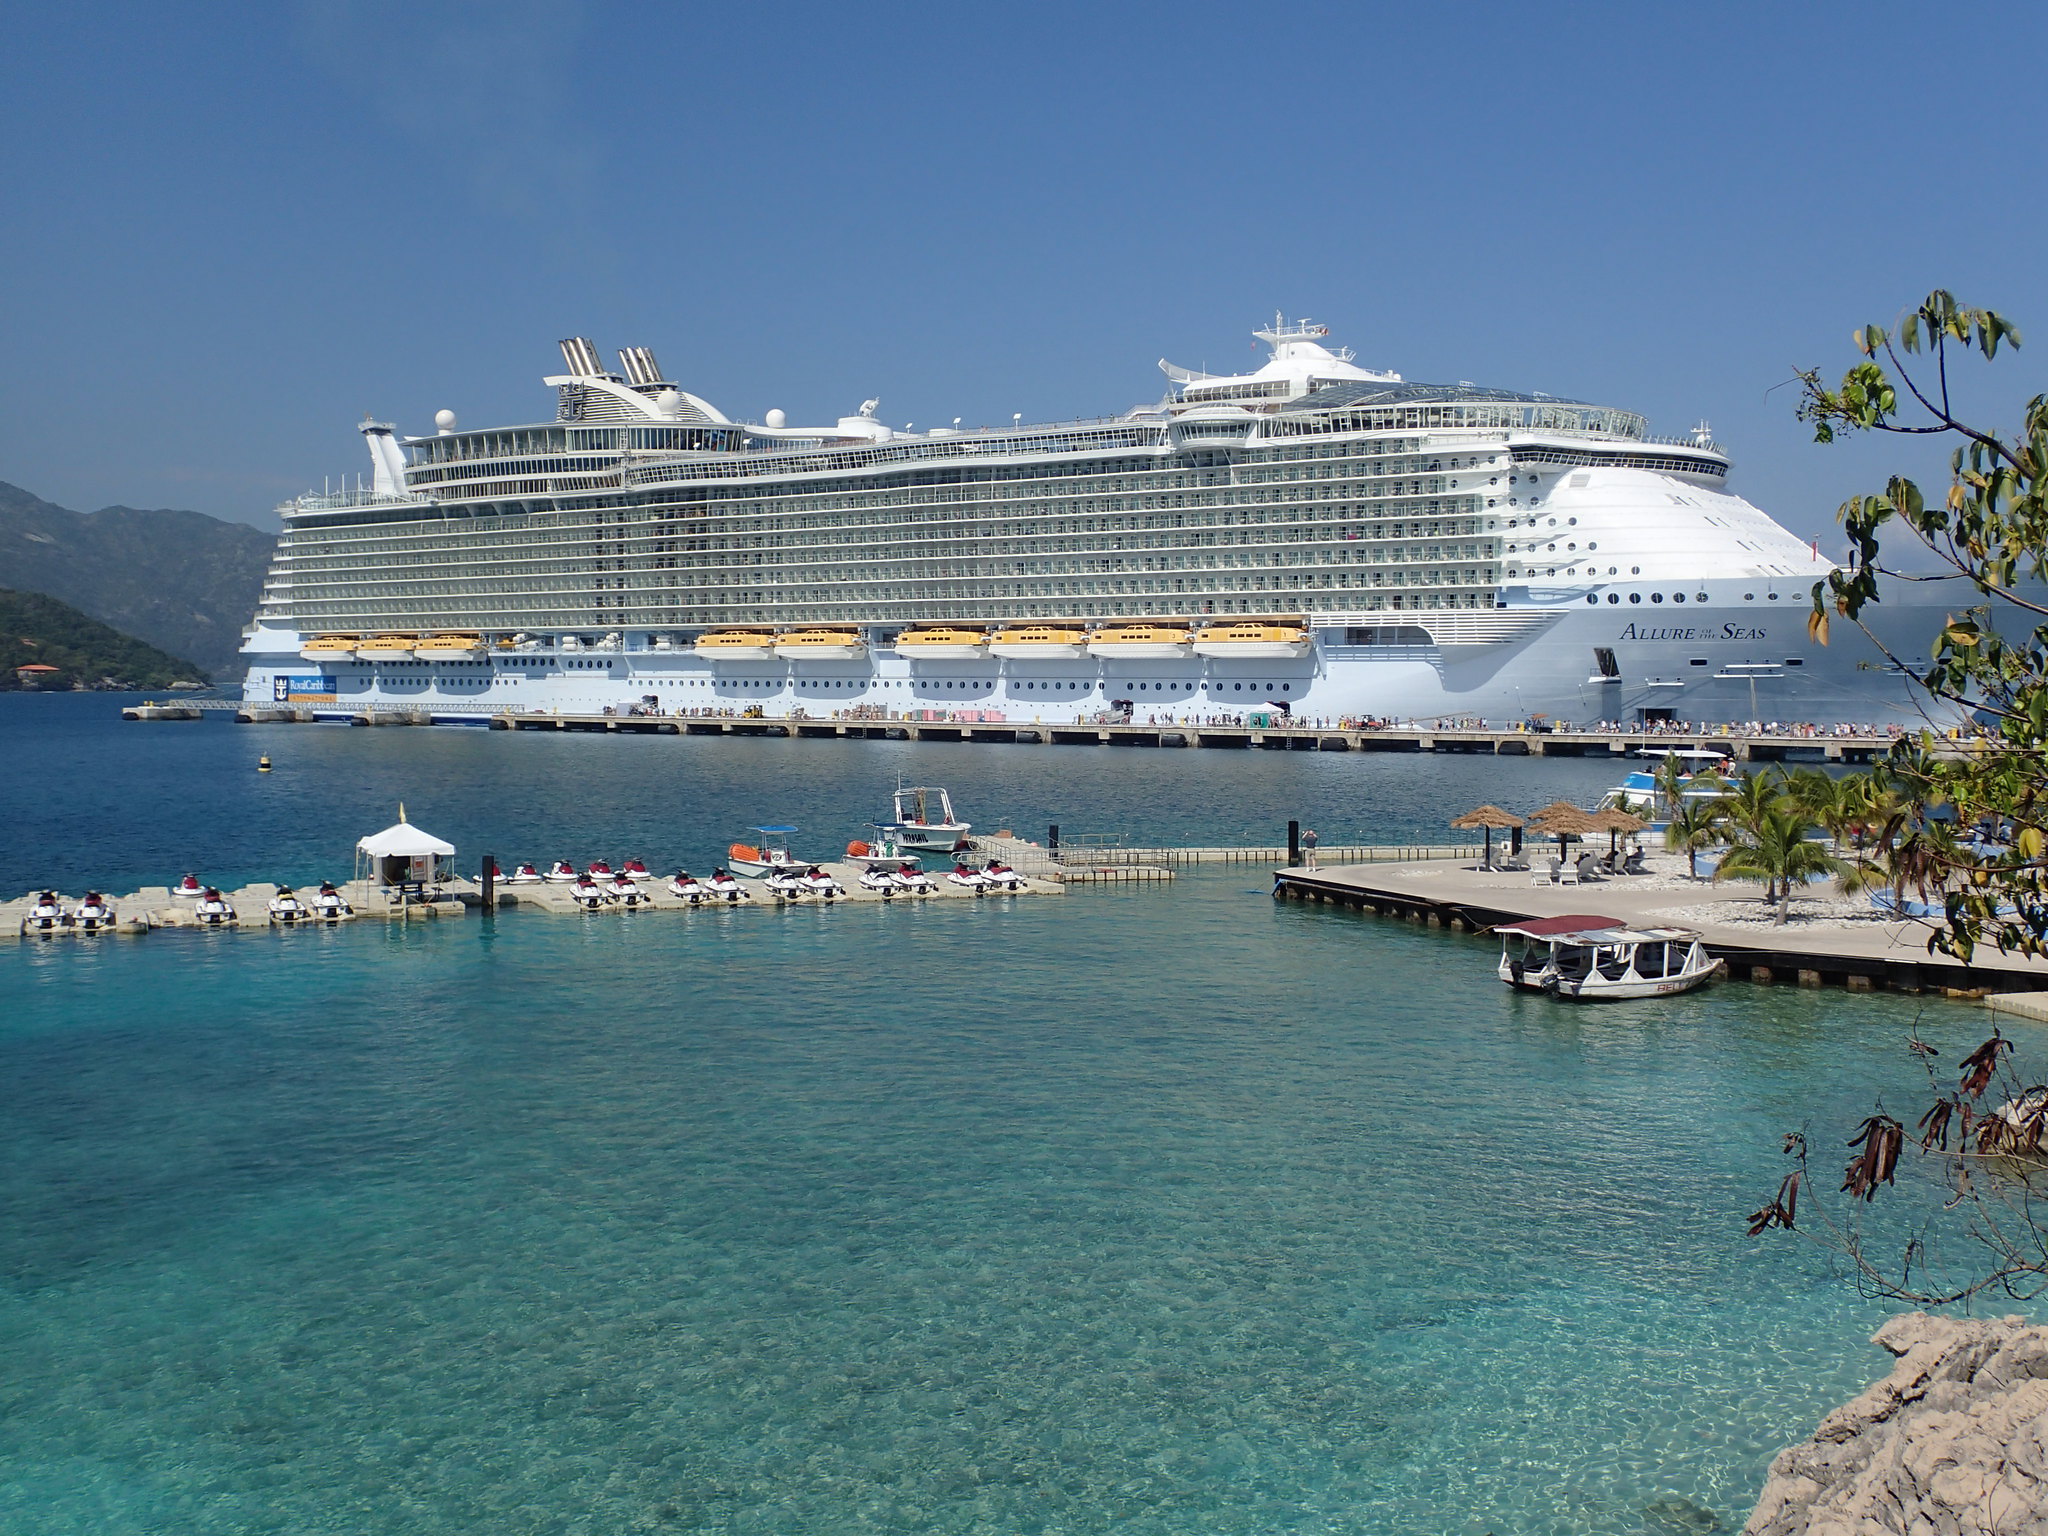 Royal Caribbean Expands COVID-19 Policy As 6 Guests Test Positive On Ship